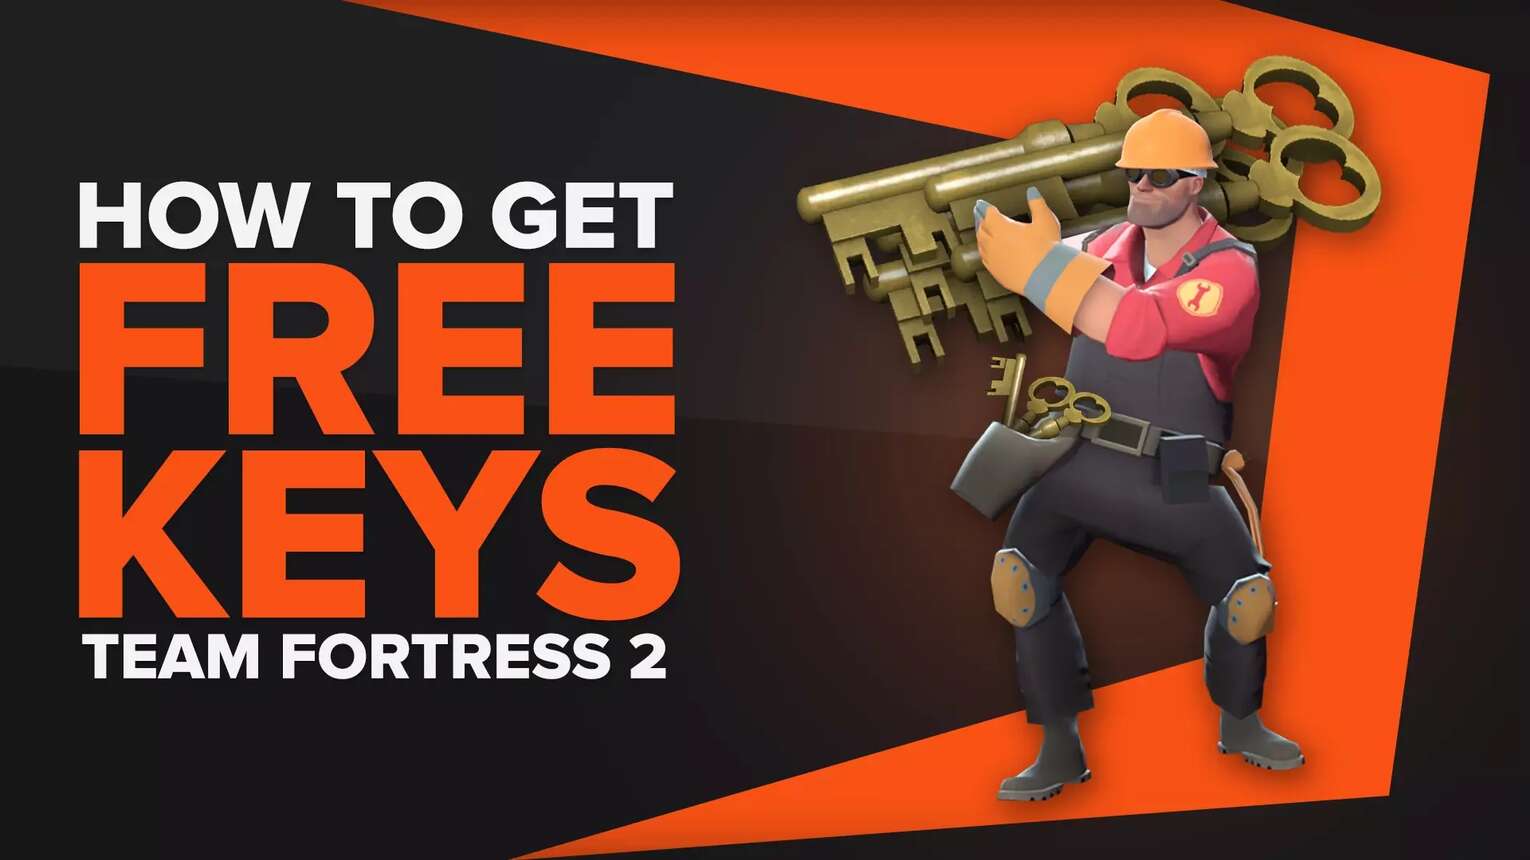 The 5 Best Ways to Get Free Keys in Team Fortress 2